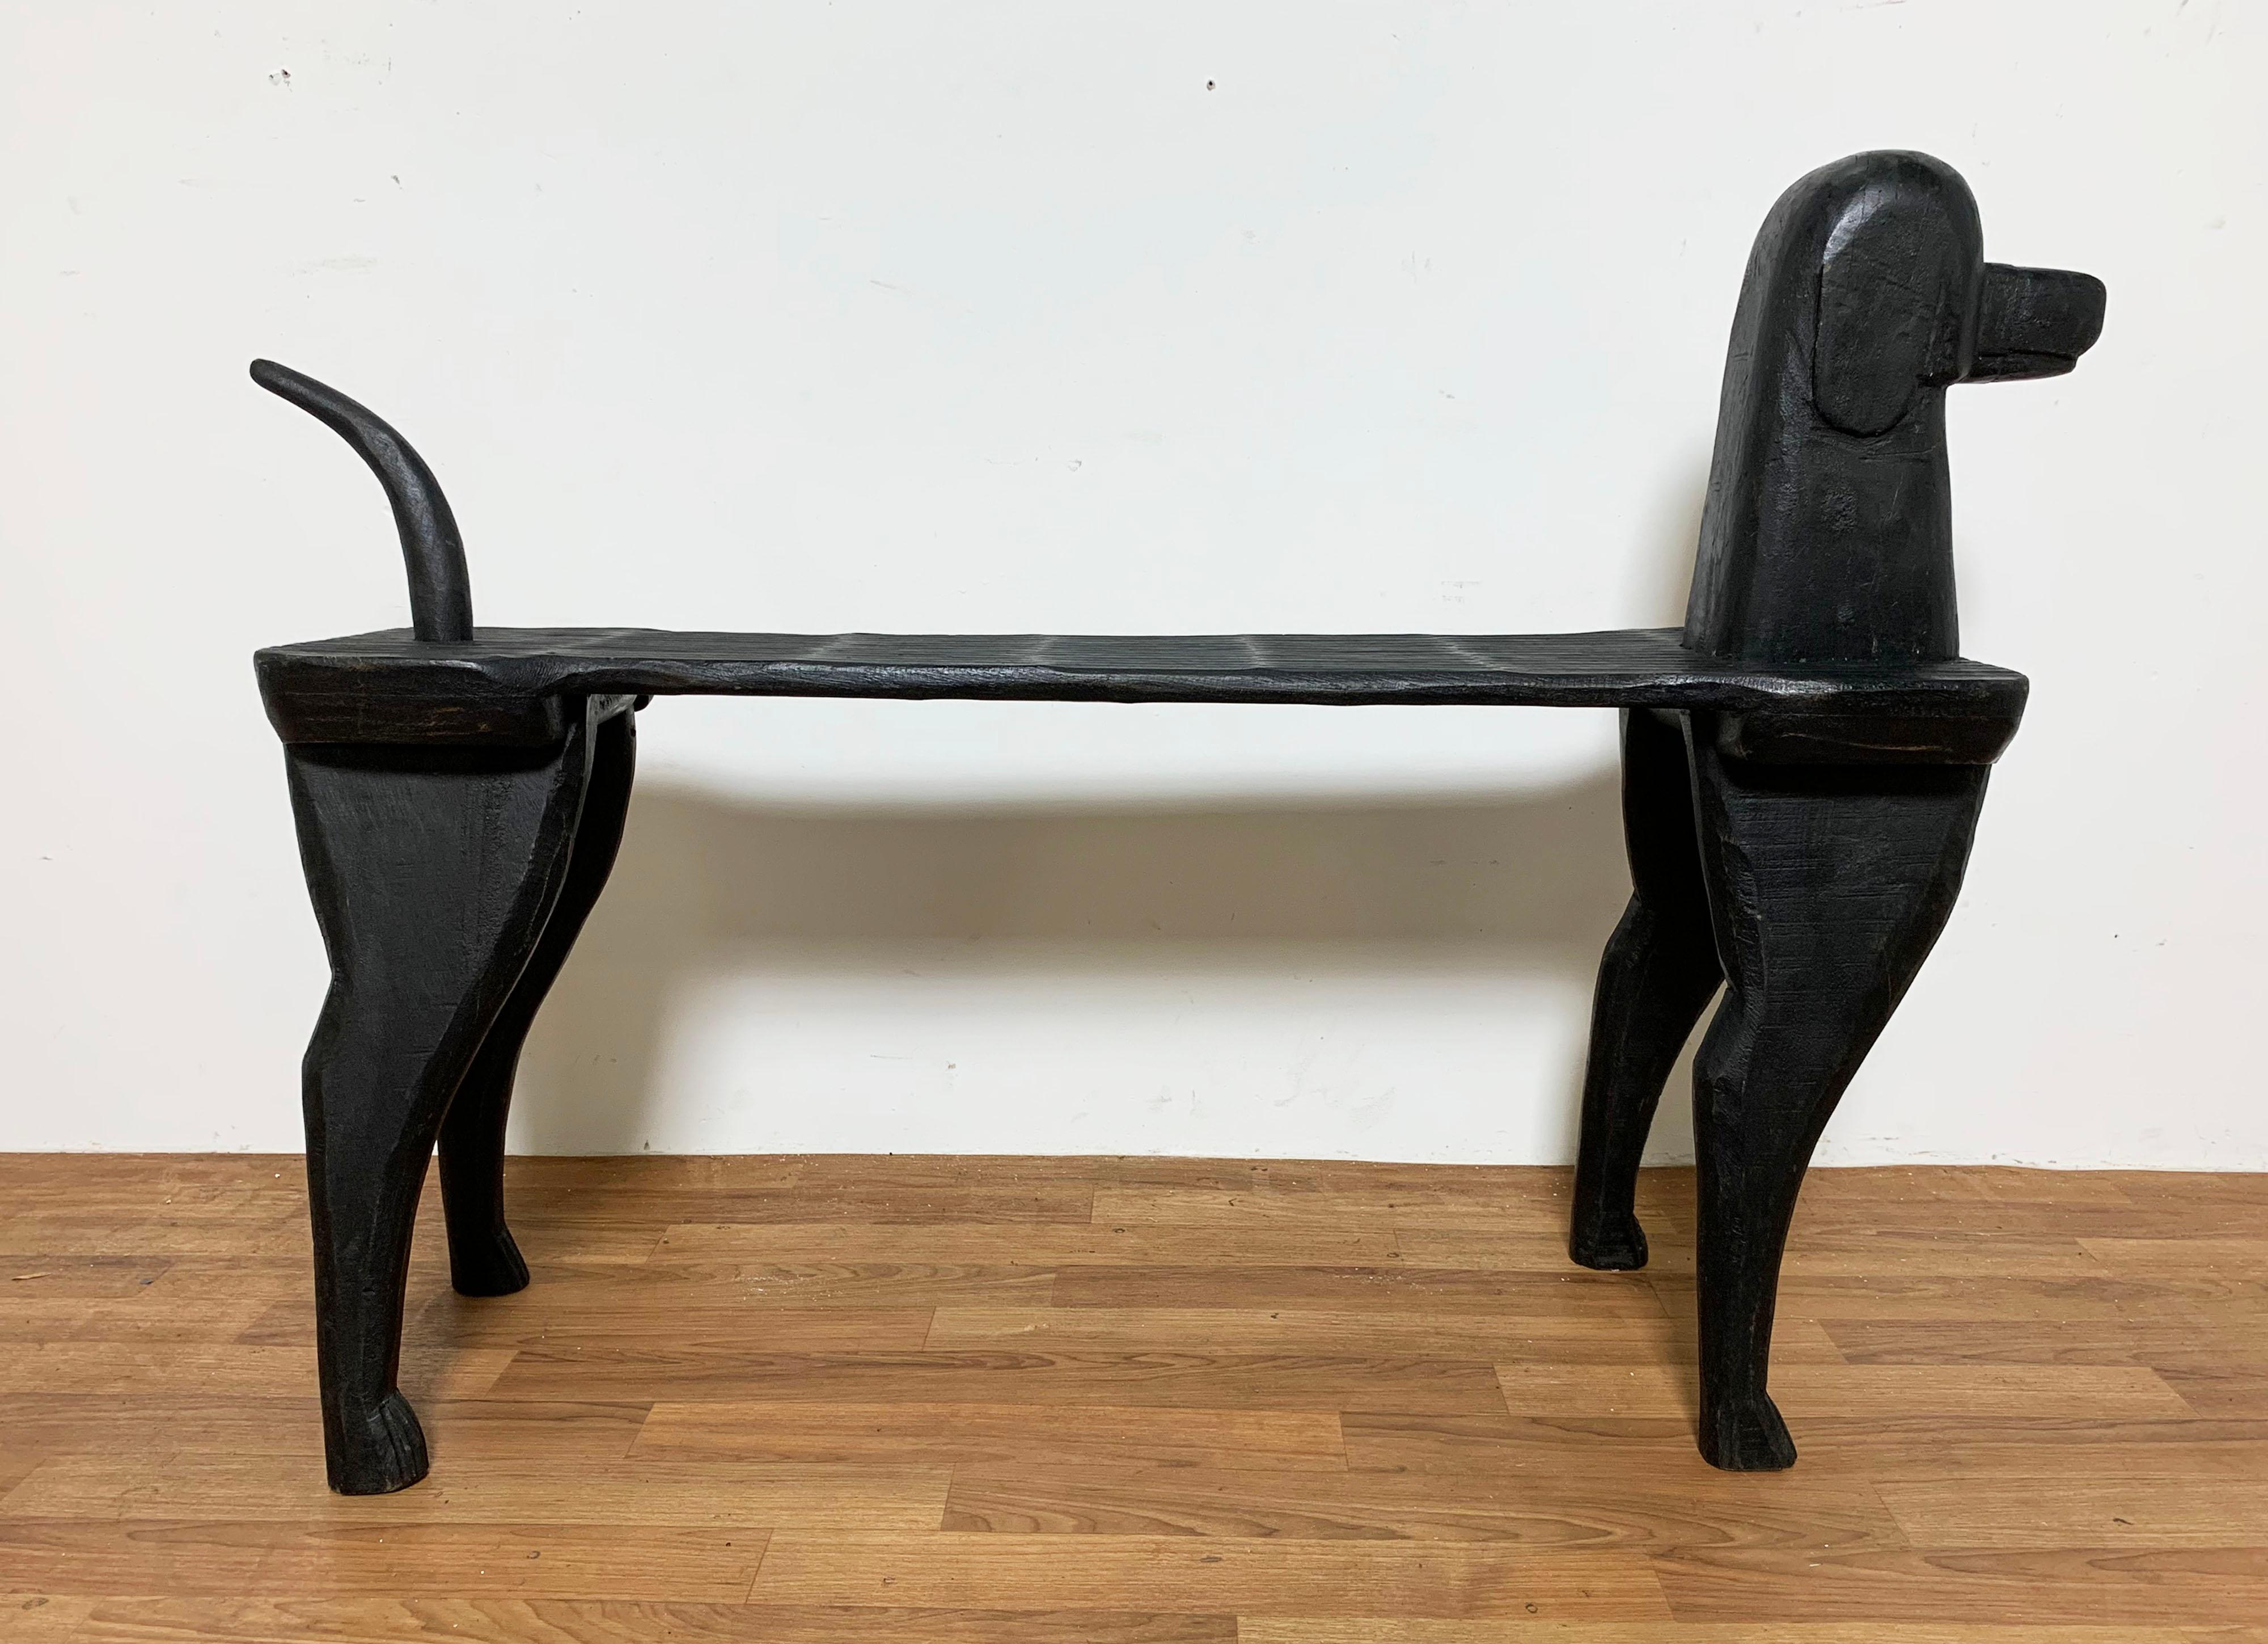 Hand carved Folk Art bench in the form of a Labrador retriever by the celebrated Vermont artist and wood carver Stephen Huneck, ca. 1990s. 

Huneck was a fascinating wood carver, painter, antiques dealer and author who devoted much of his later